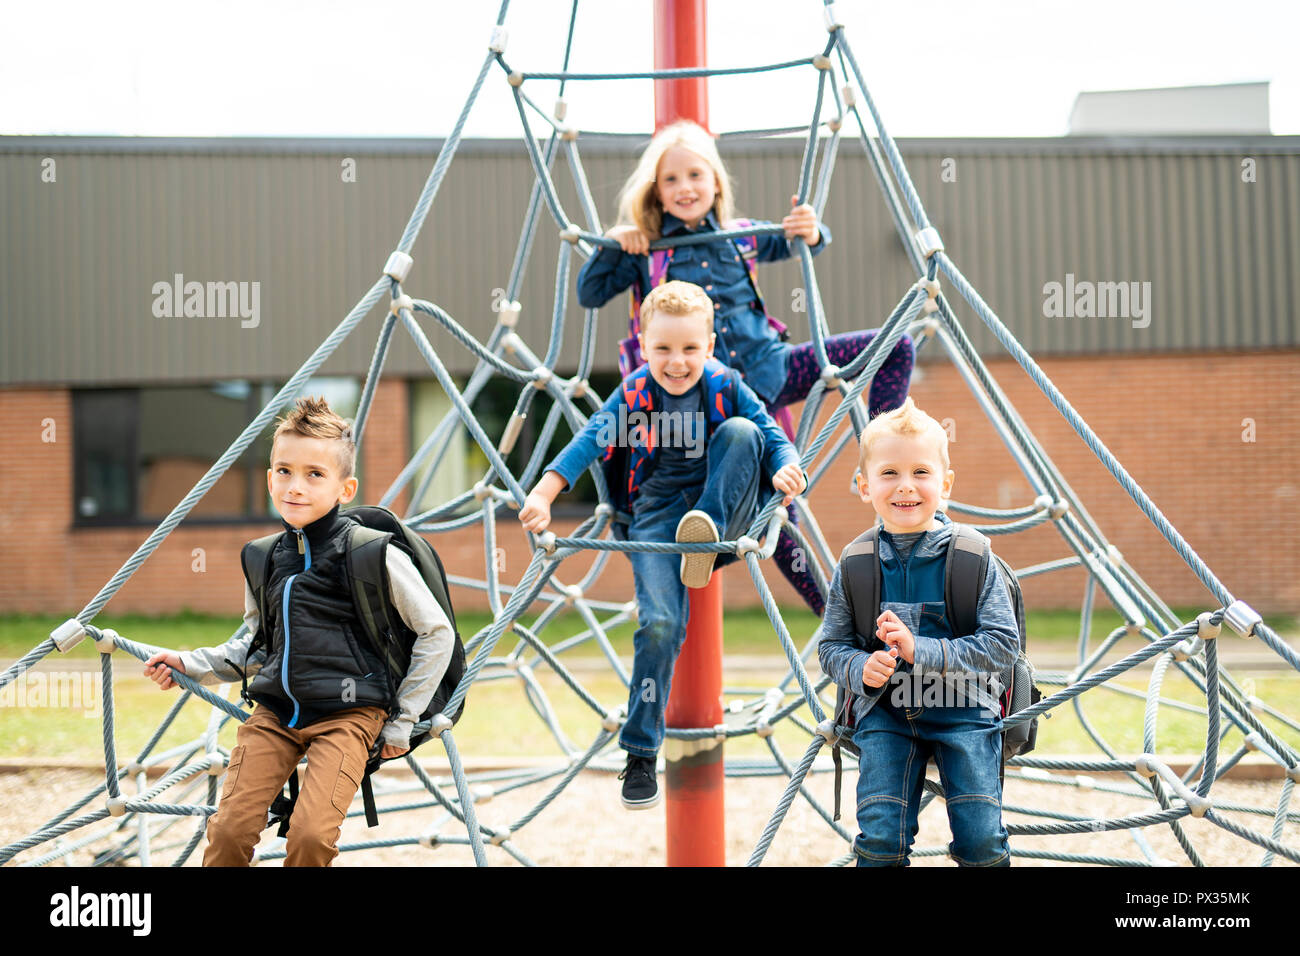 A happy excited kids having fun together on playground Stock Photo